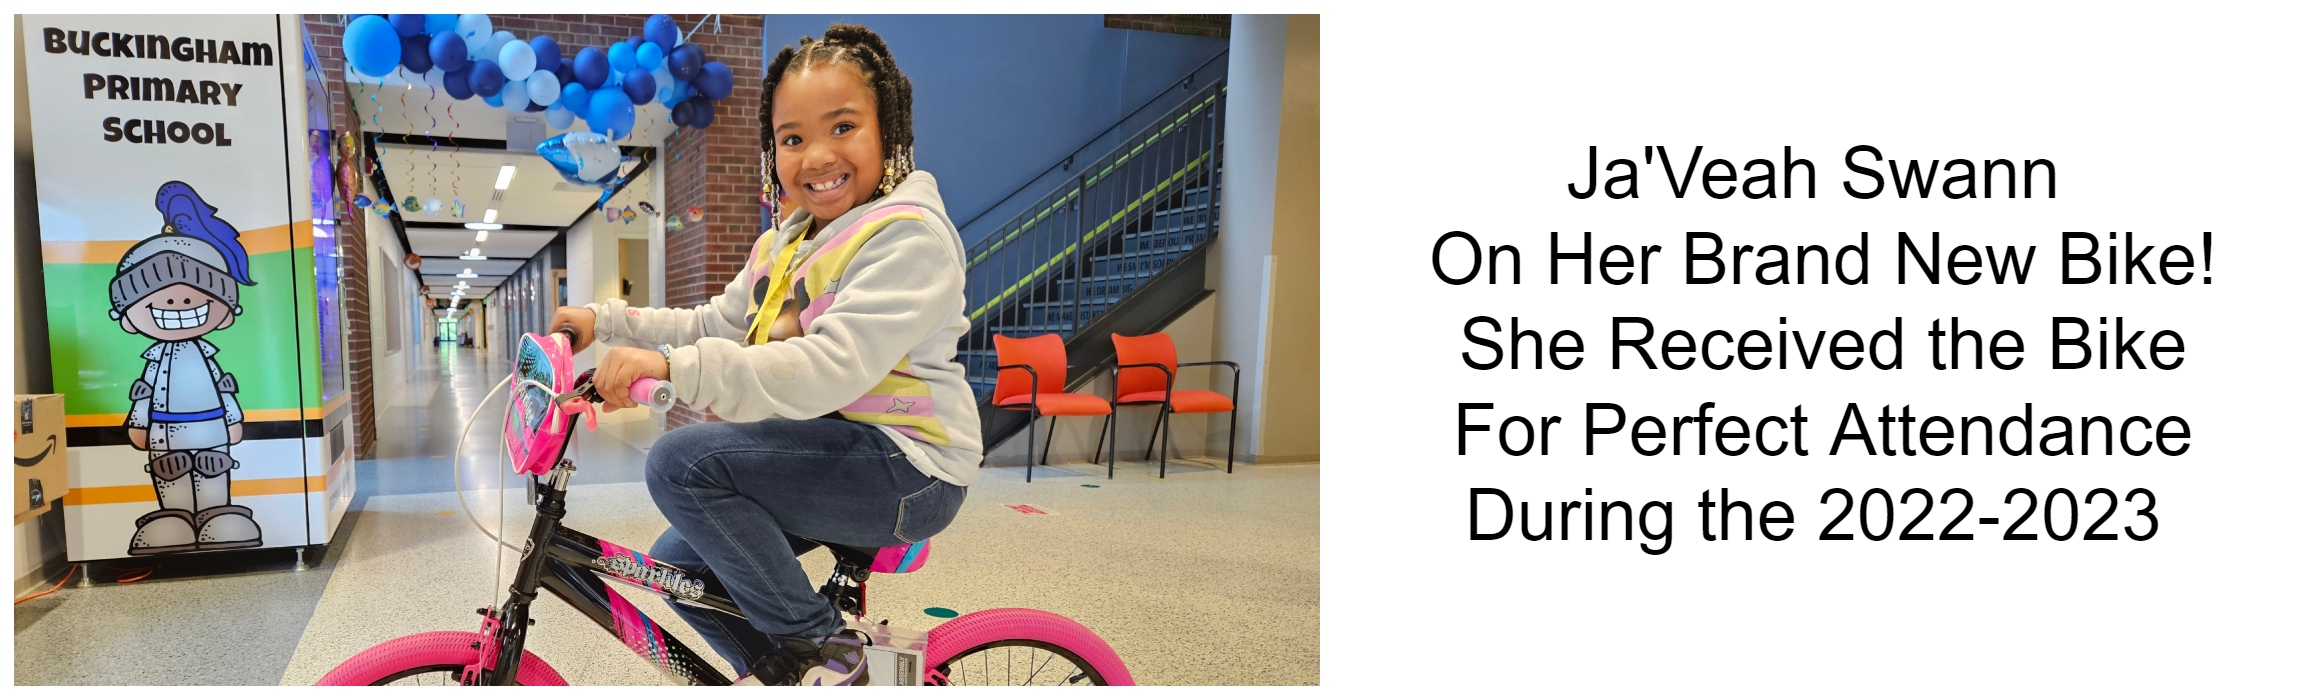 Ja'Veah Swann  On Her Brand New Bike! She Received the Bike For Perfect Attendance During the 2022-2023 